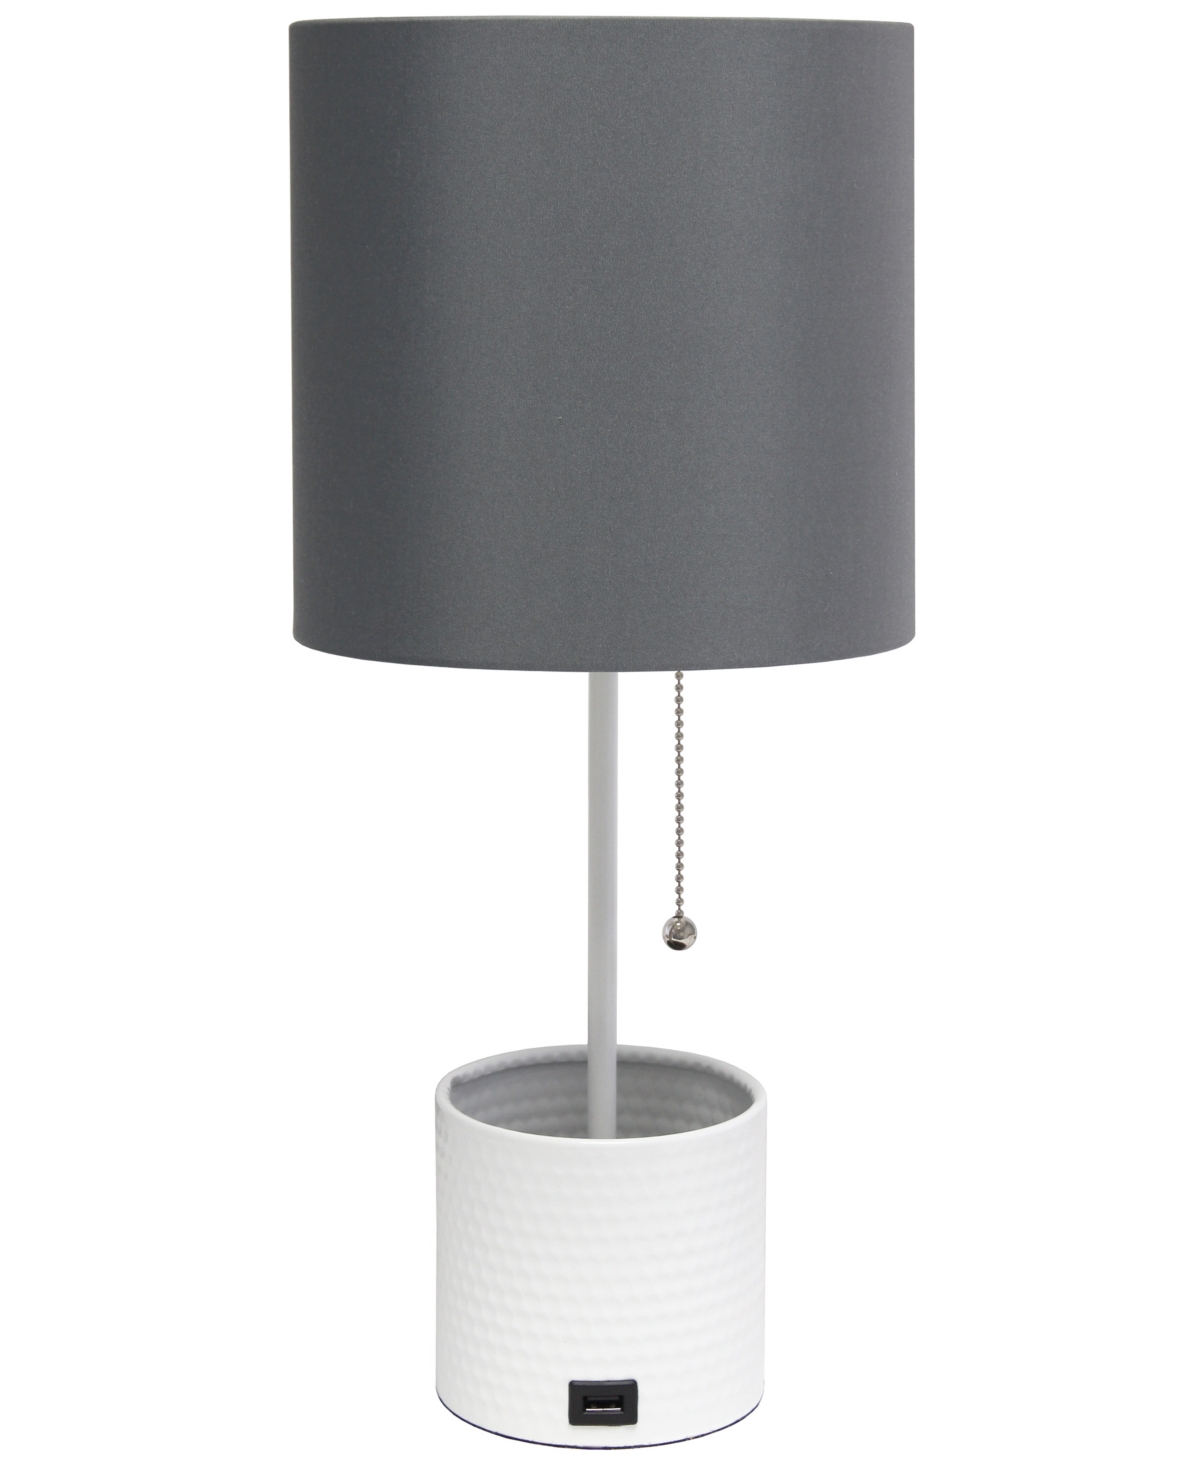 Simple Designs Hammered Metal Organizer Table Lamp With Usb Charging Port And Fabric Shade In Gray,white